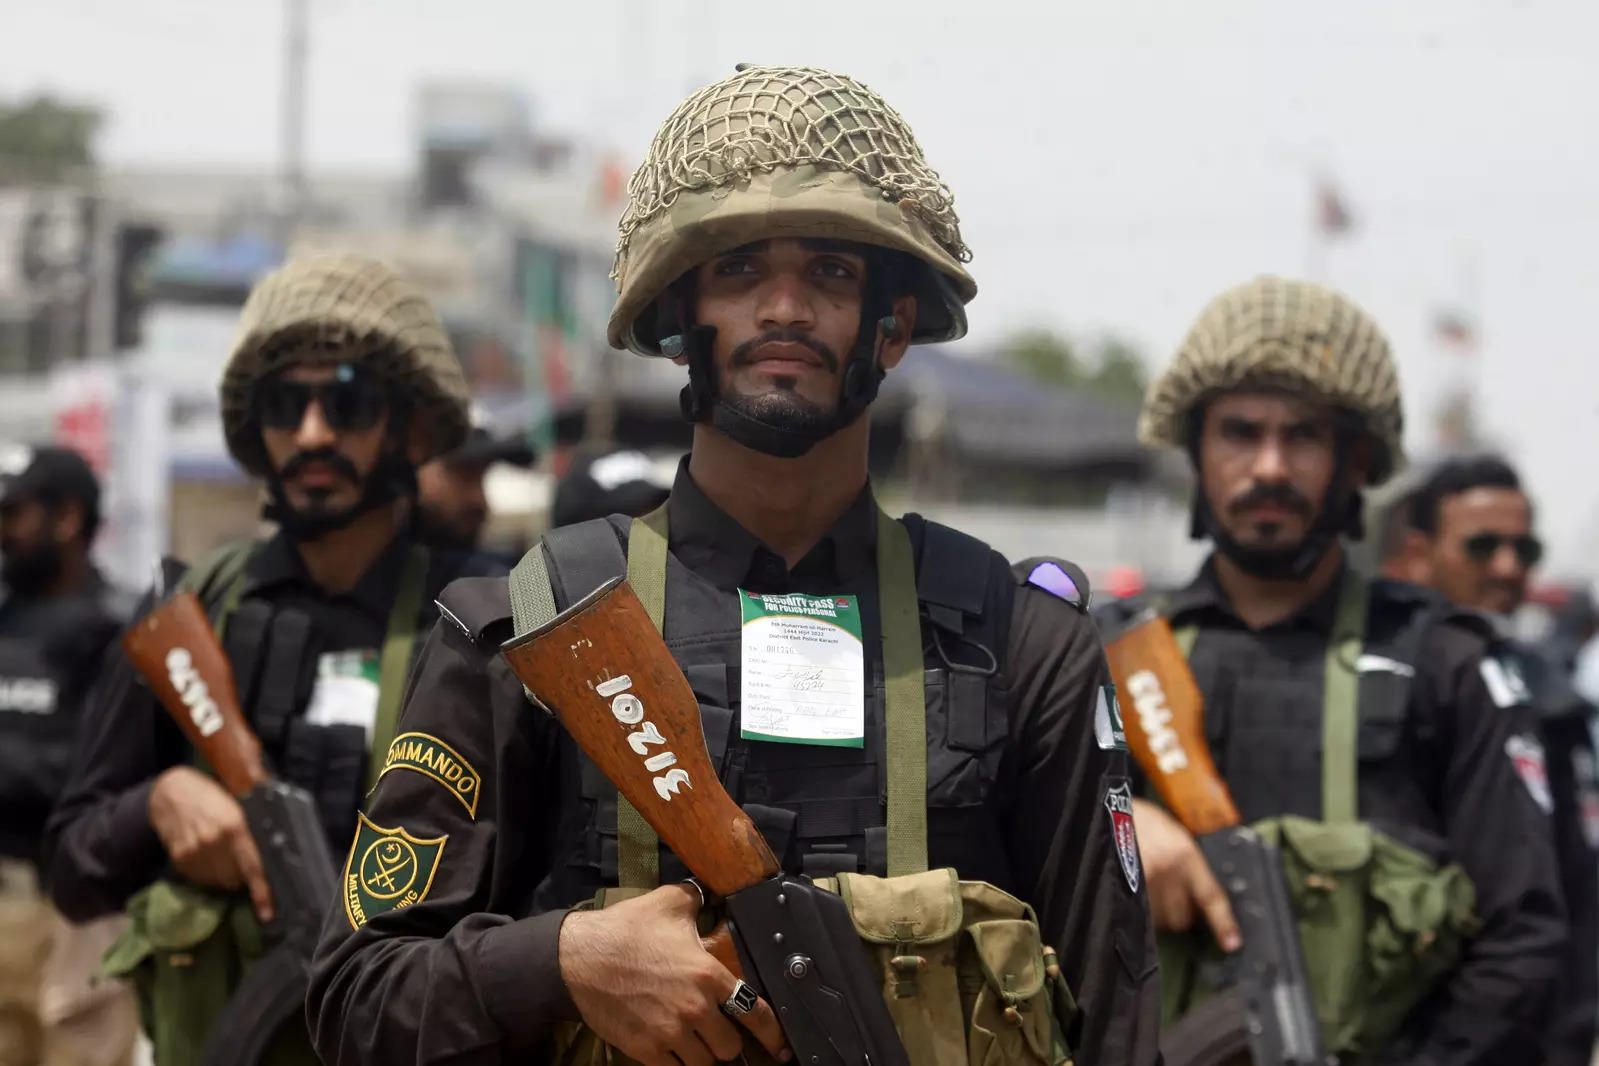 Pakistan army stand along the route of a Shiite Muslim's Muharram procession in Karachi (File photo)